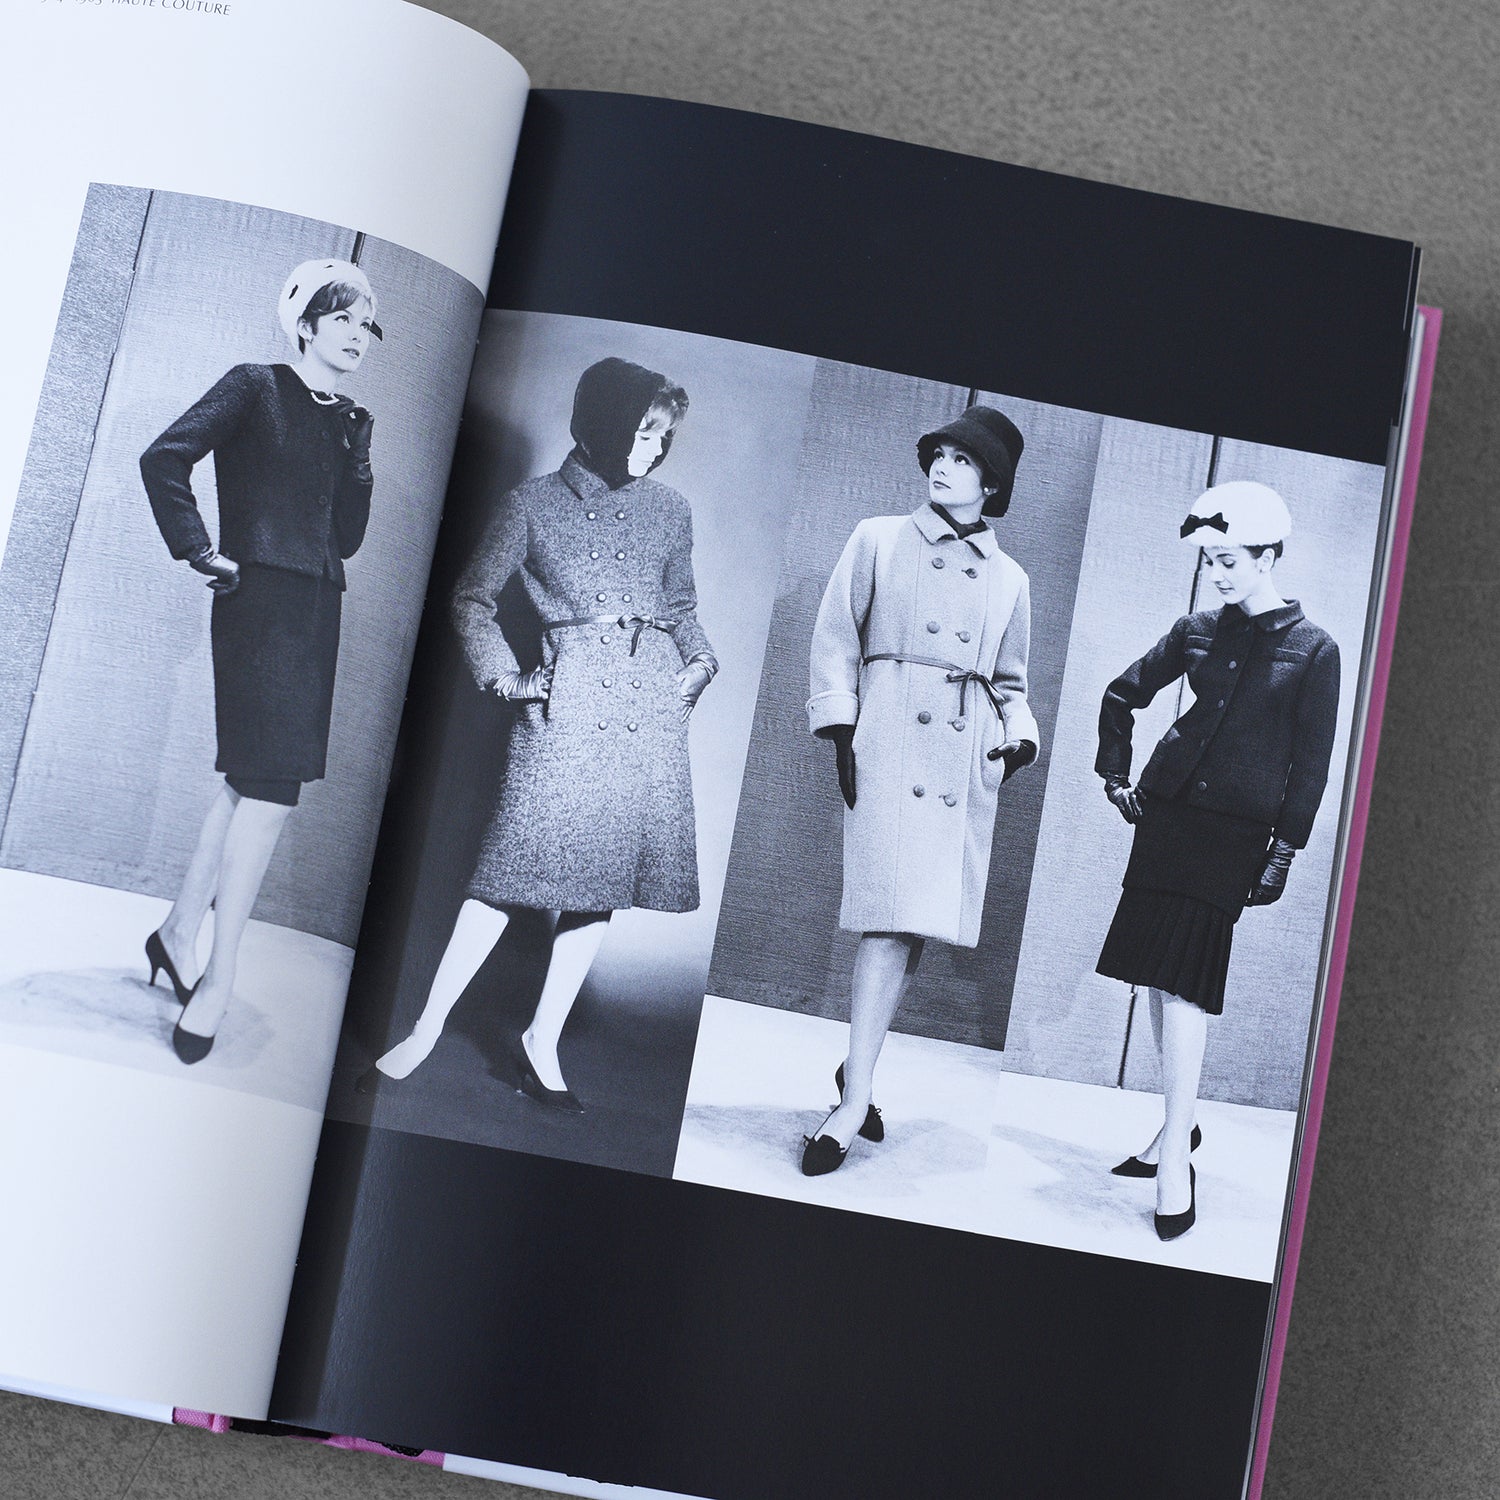 Yves Saint Laurent: The Complete Haute Couture Collections, 1962